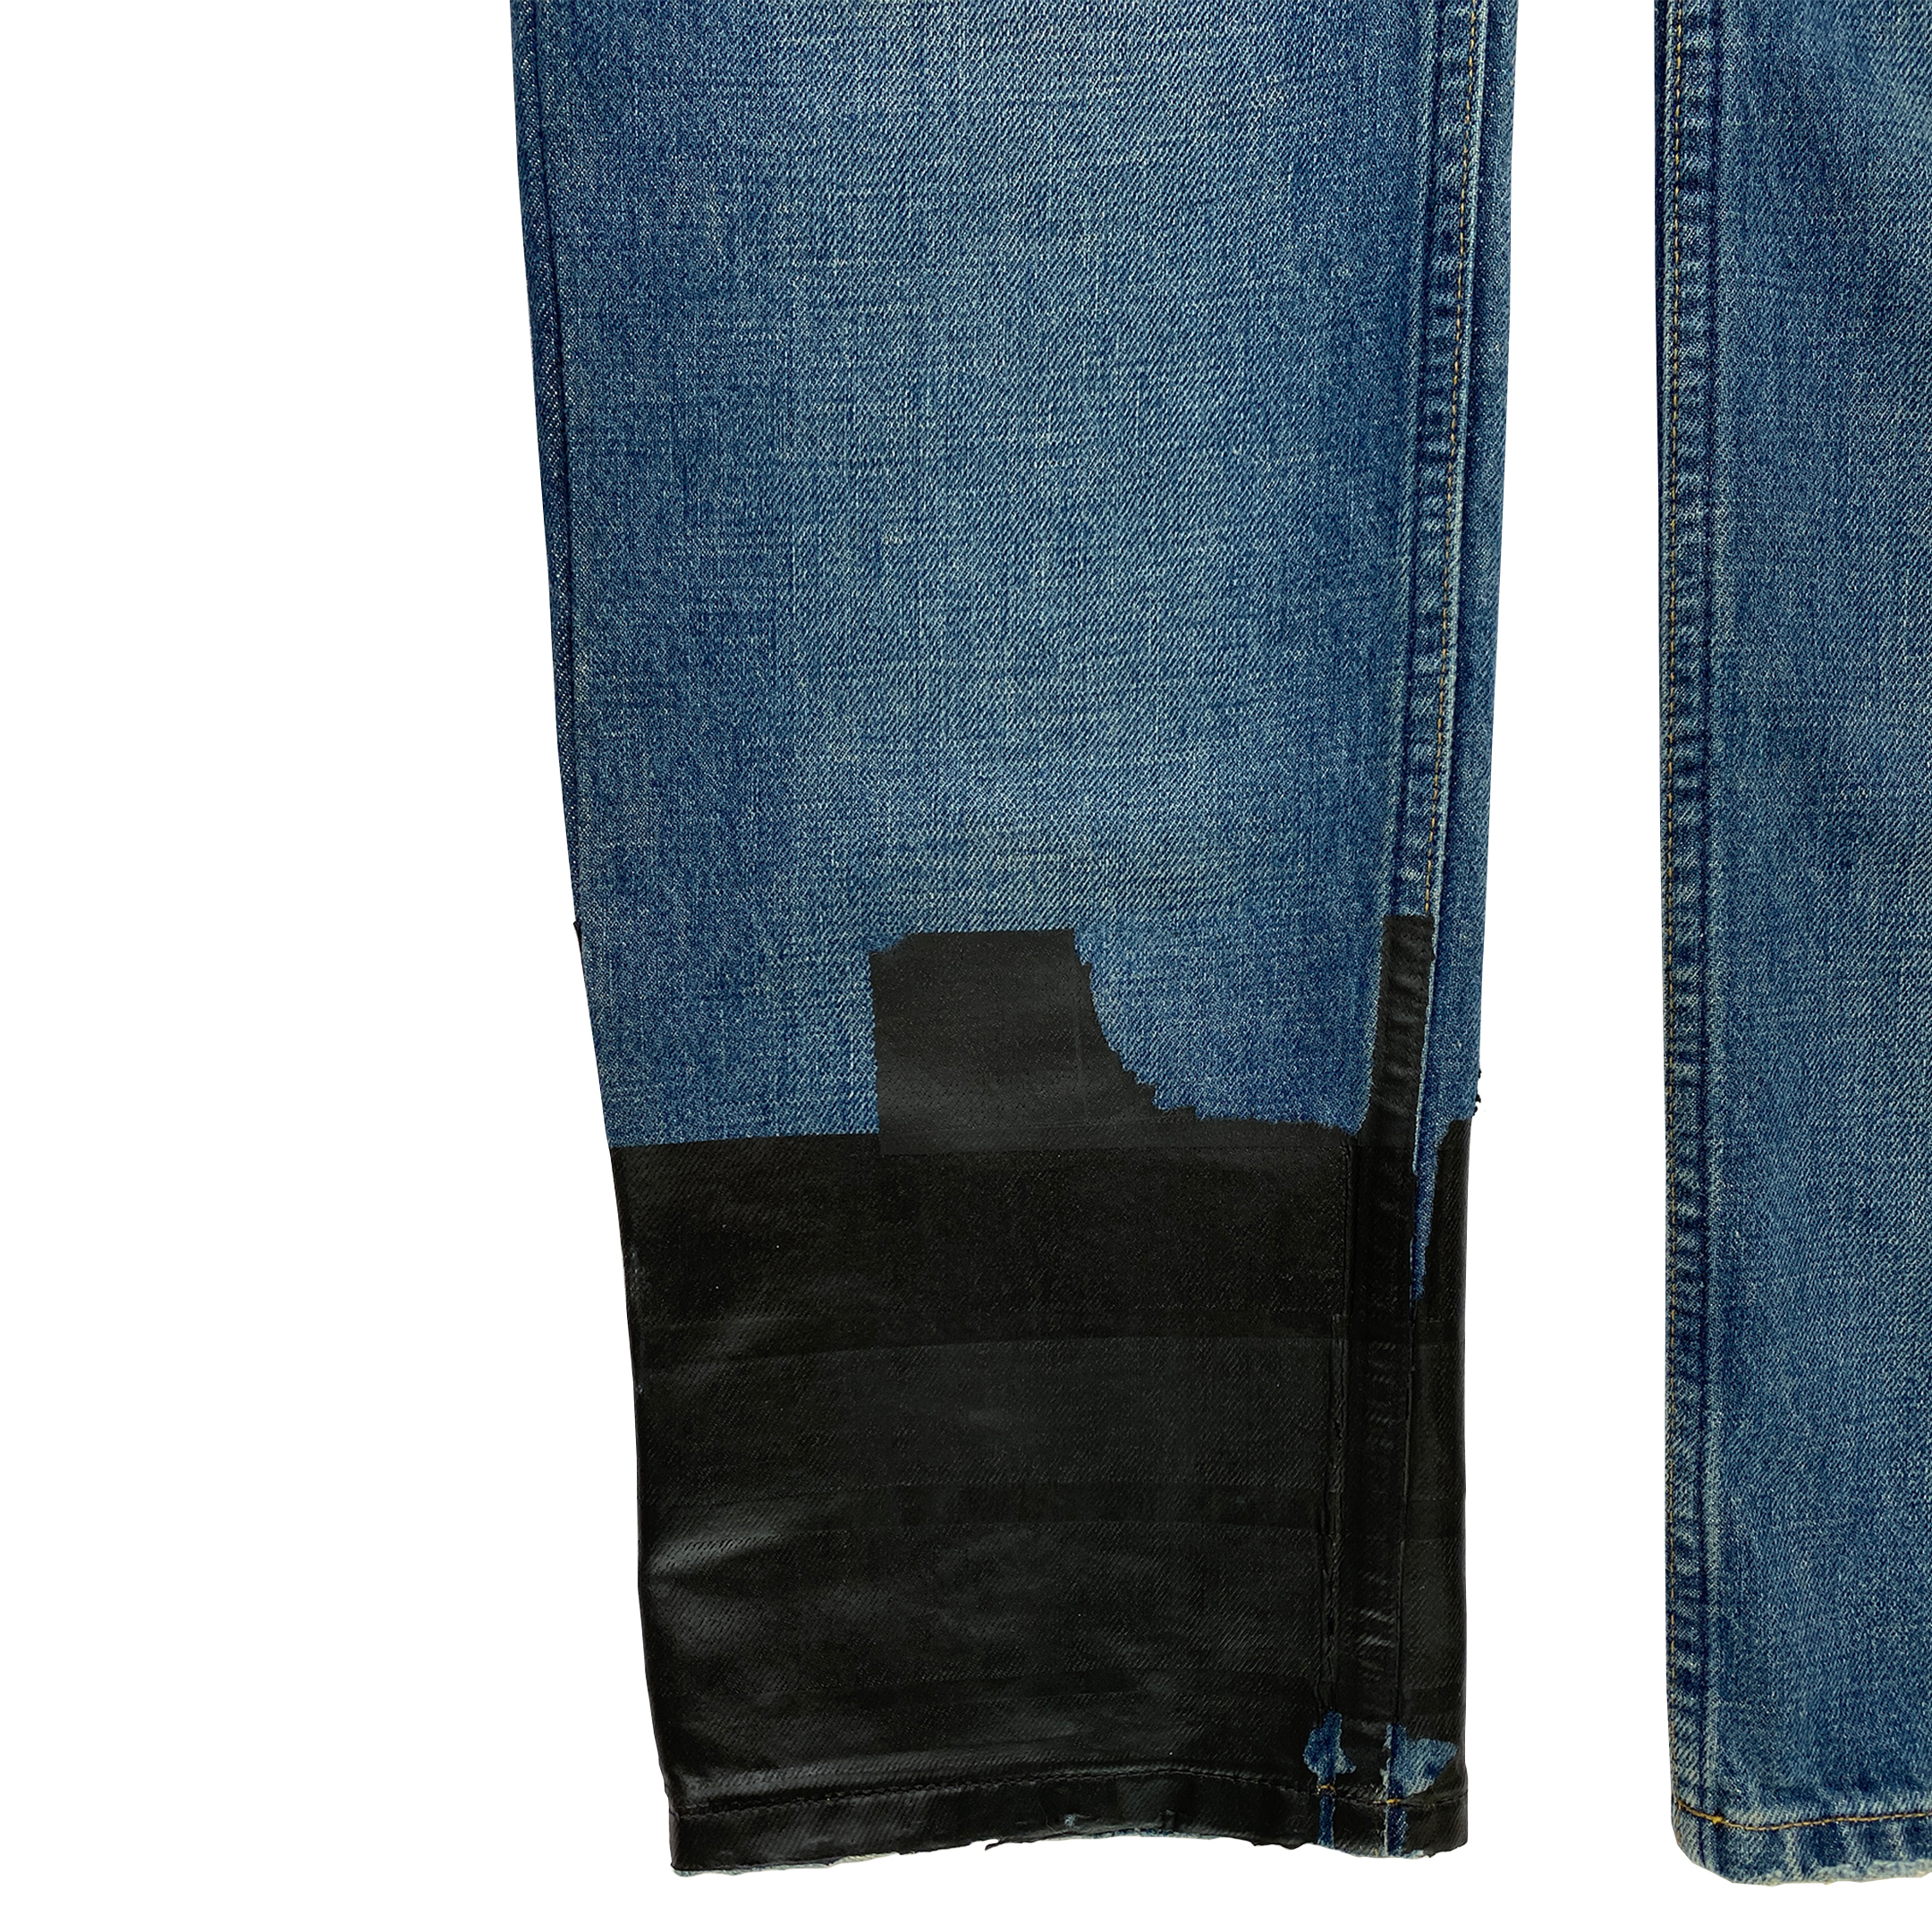 Helmut Lang, S/S 2003 Classic Vintage Denim with Rubber Tape